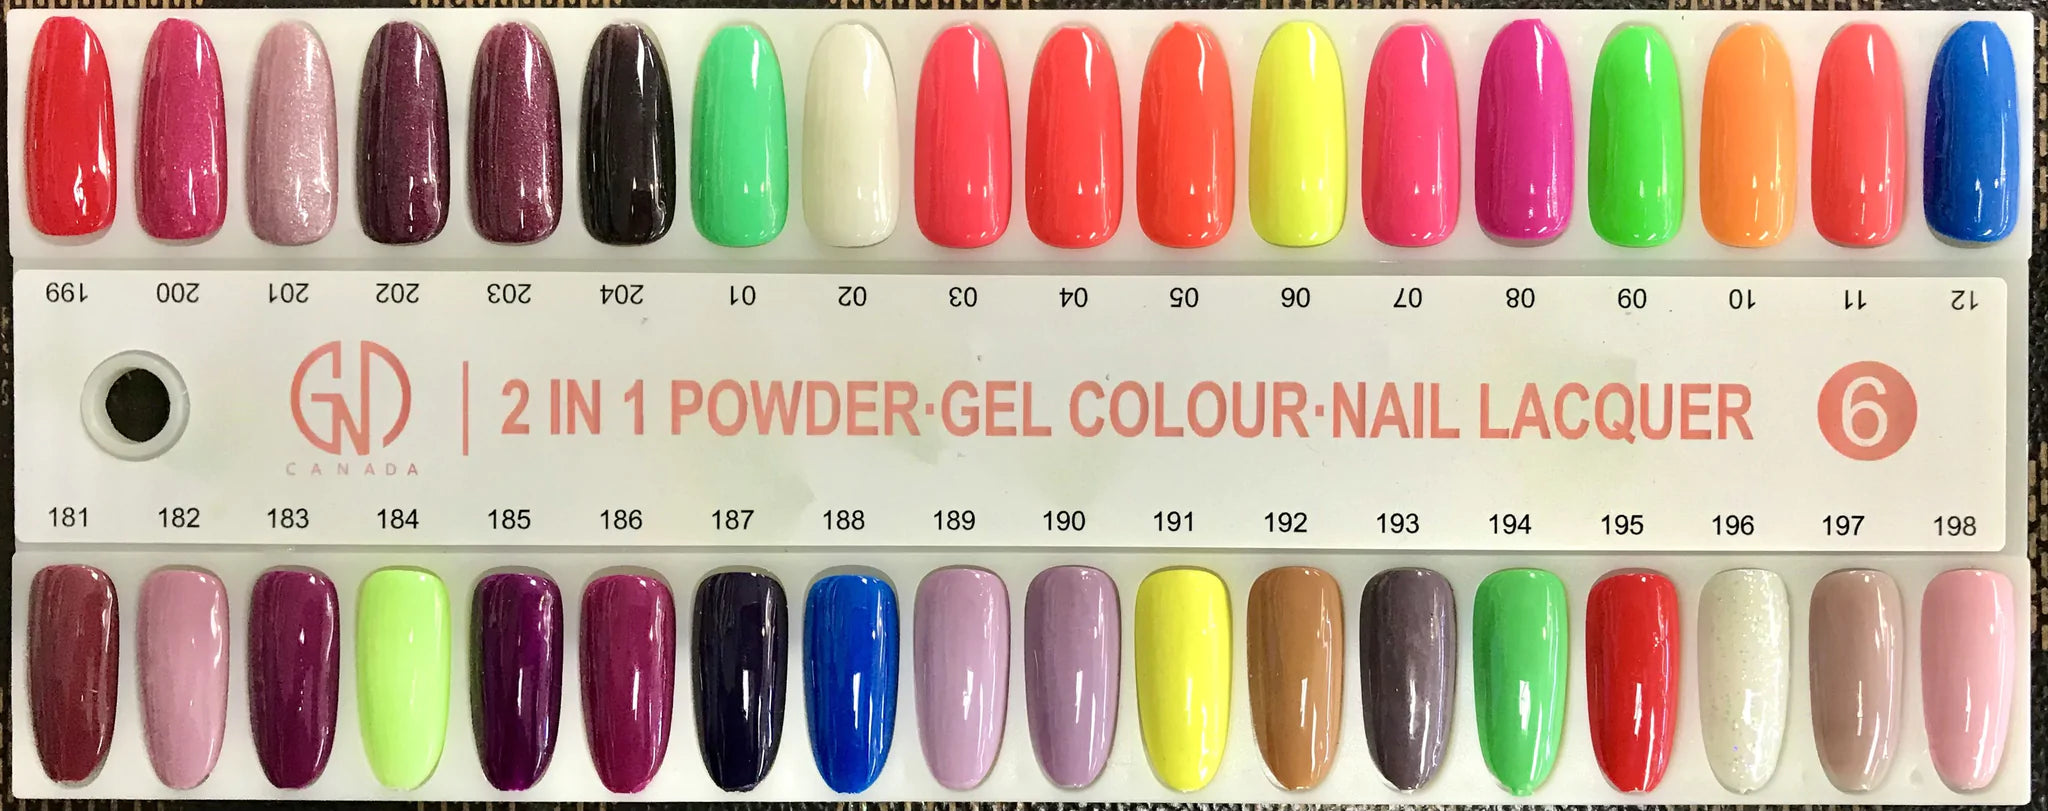 GND Duo Gel & Lacquer 188